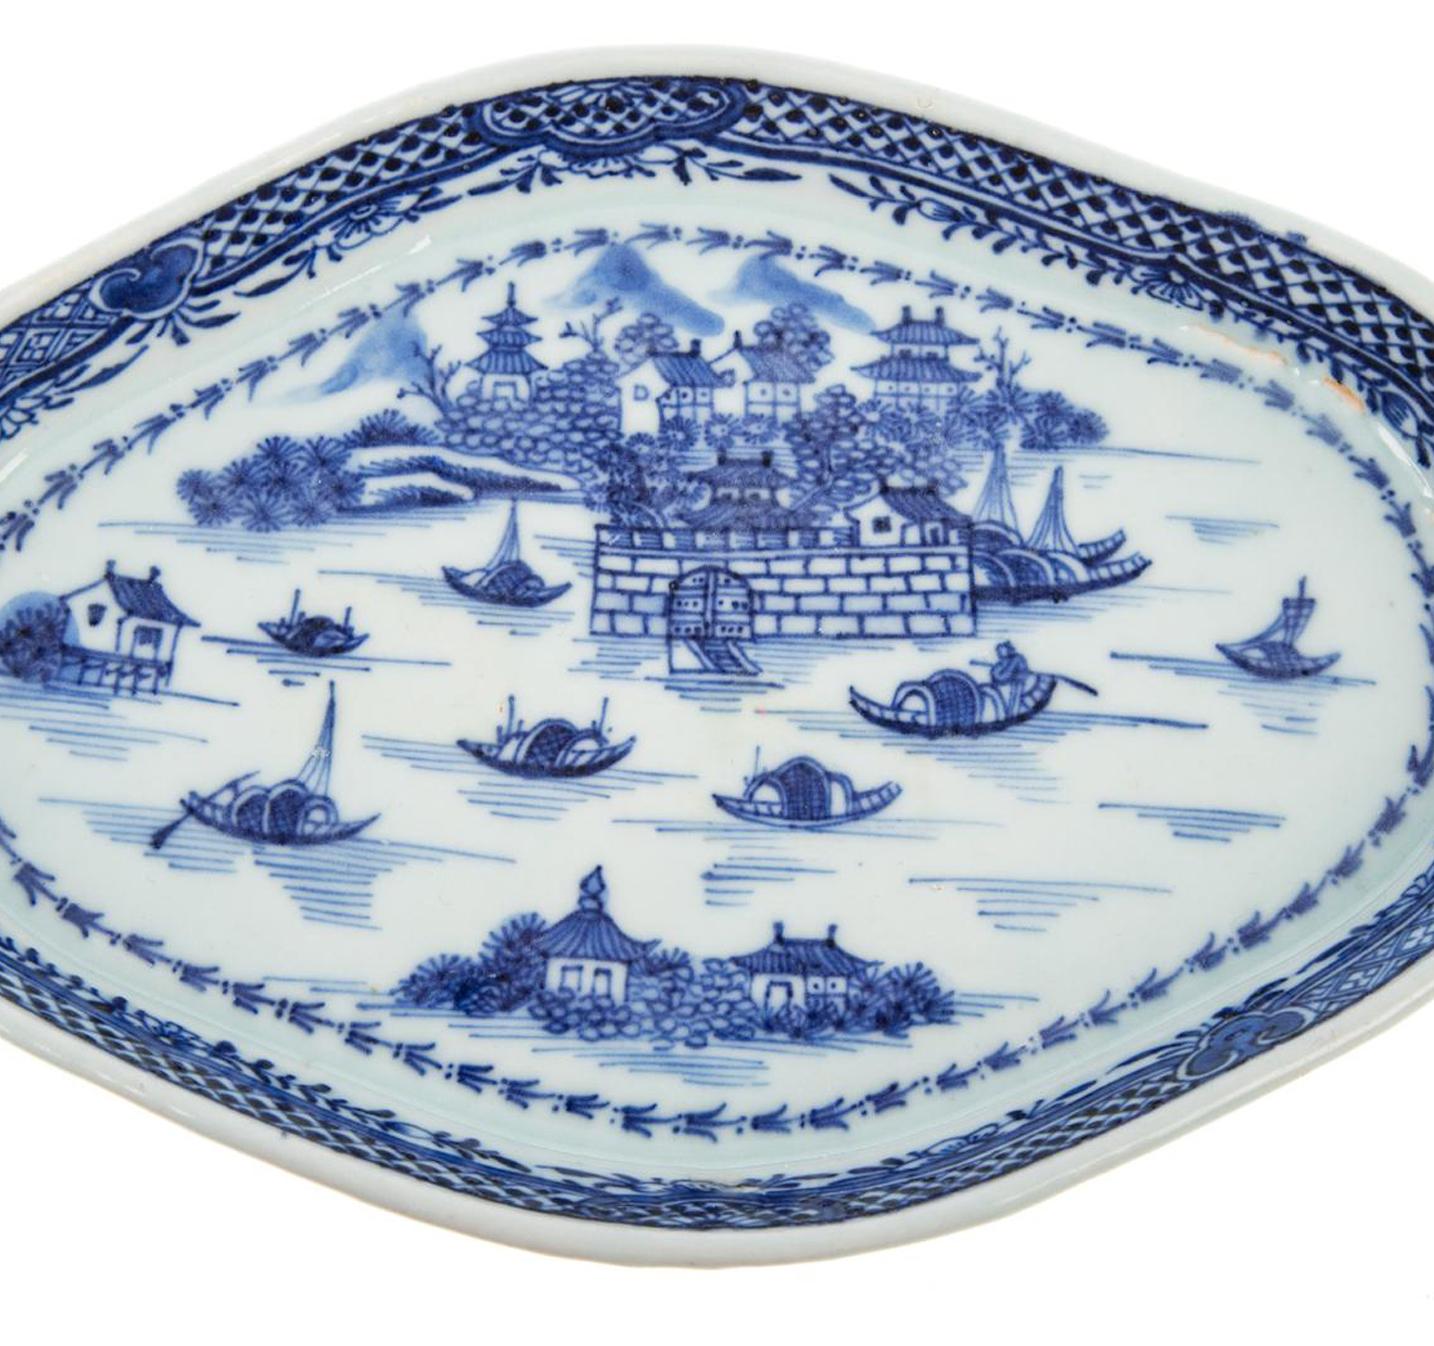 18th Century Chinese Export Porcelain Blue & White Spoon Tray with the Dutch Folly Fort For Sale